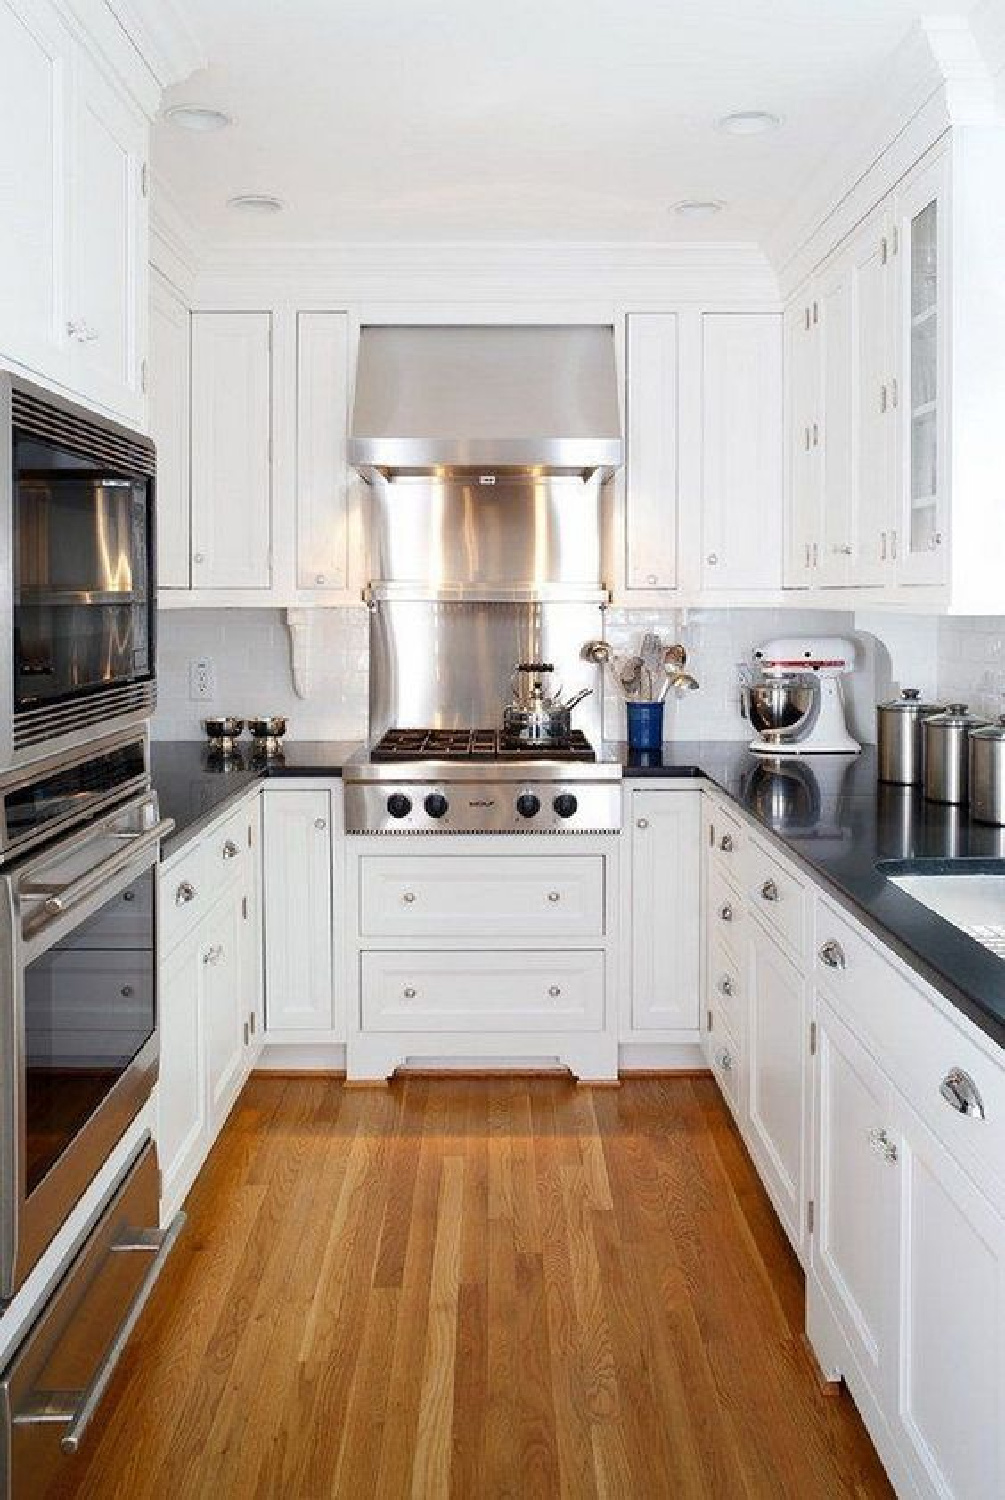 Small classic u-shaped white kitchen with black counters and wood floor - via ModernHouseMagz. #cottagekitchen #smallkitchen #ushape #kitchendesign